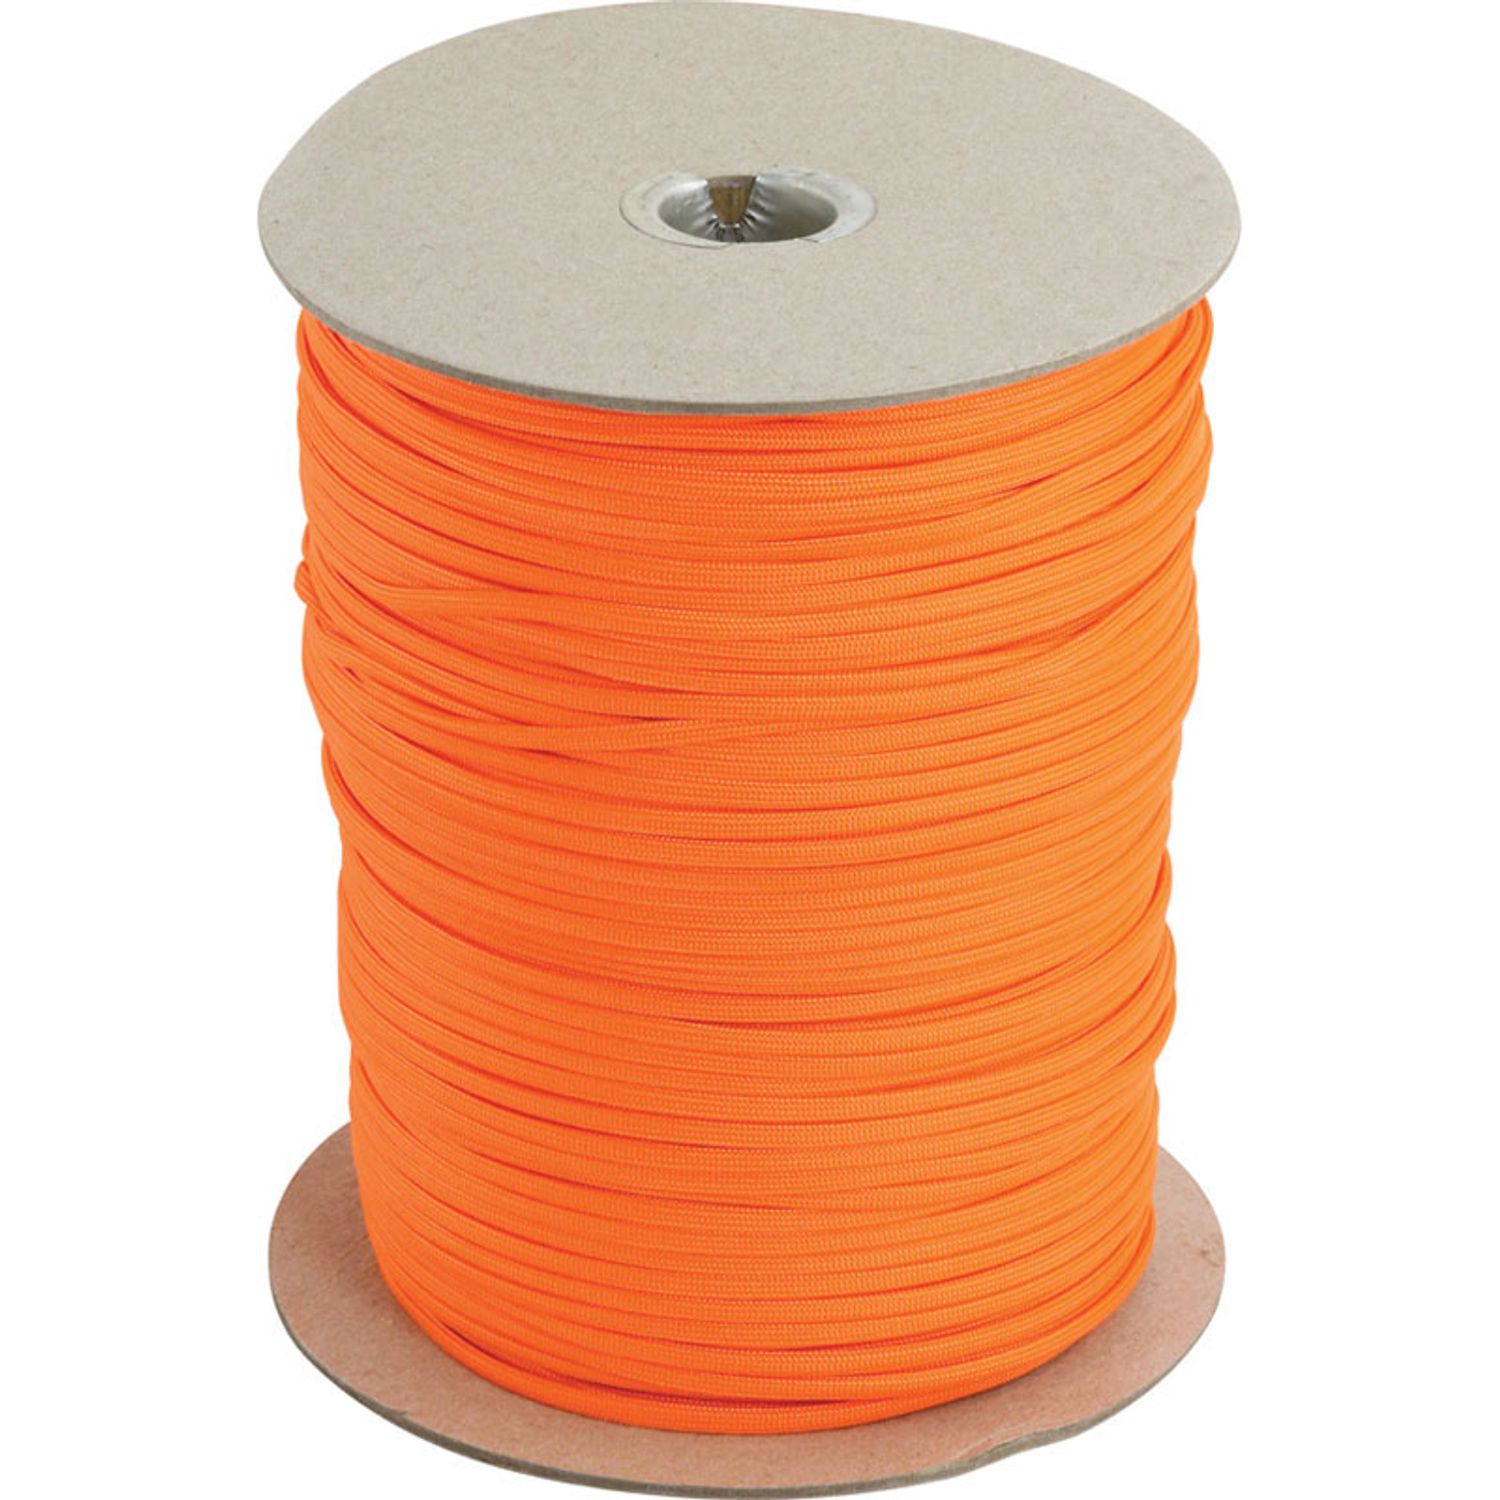 Atwood Rope 550 Paracord, Neon Orange, 1000 Foot Roll - KnifeCenter - RG105S